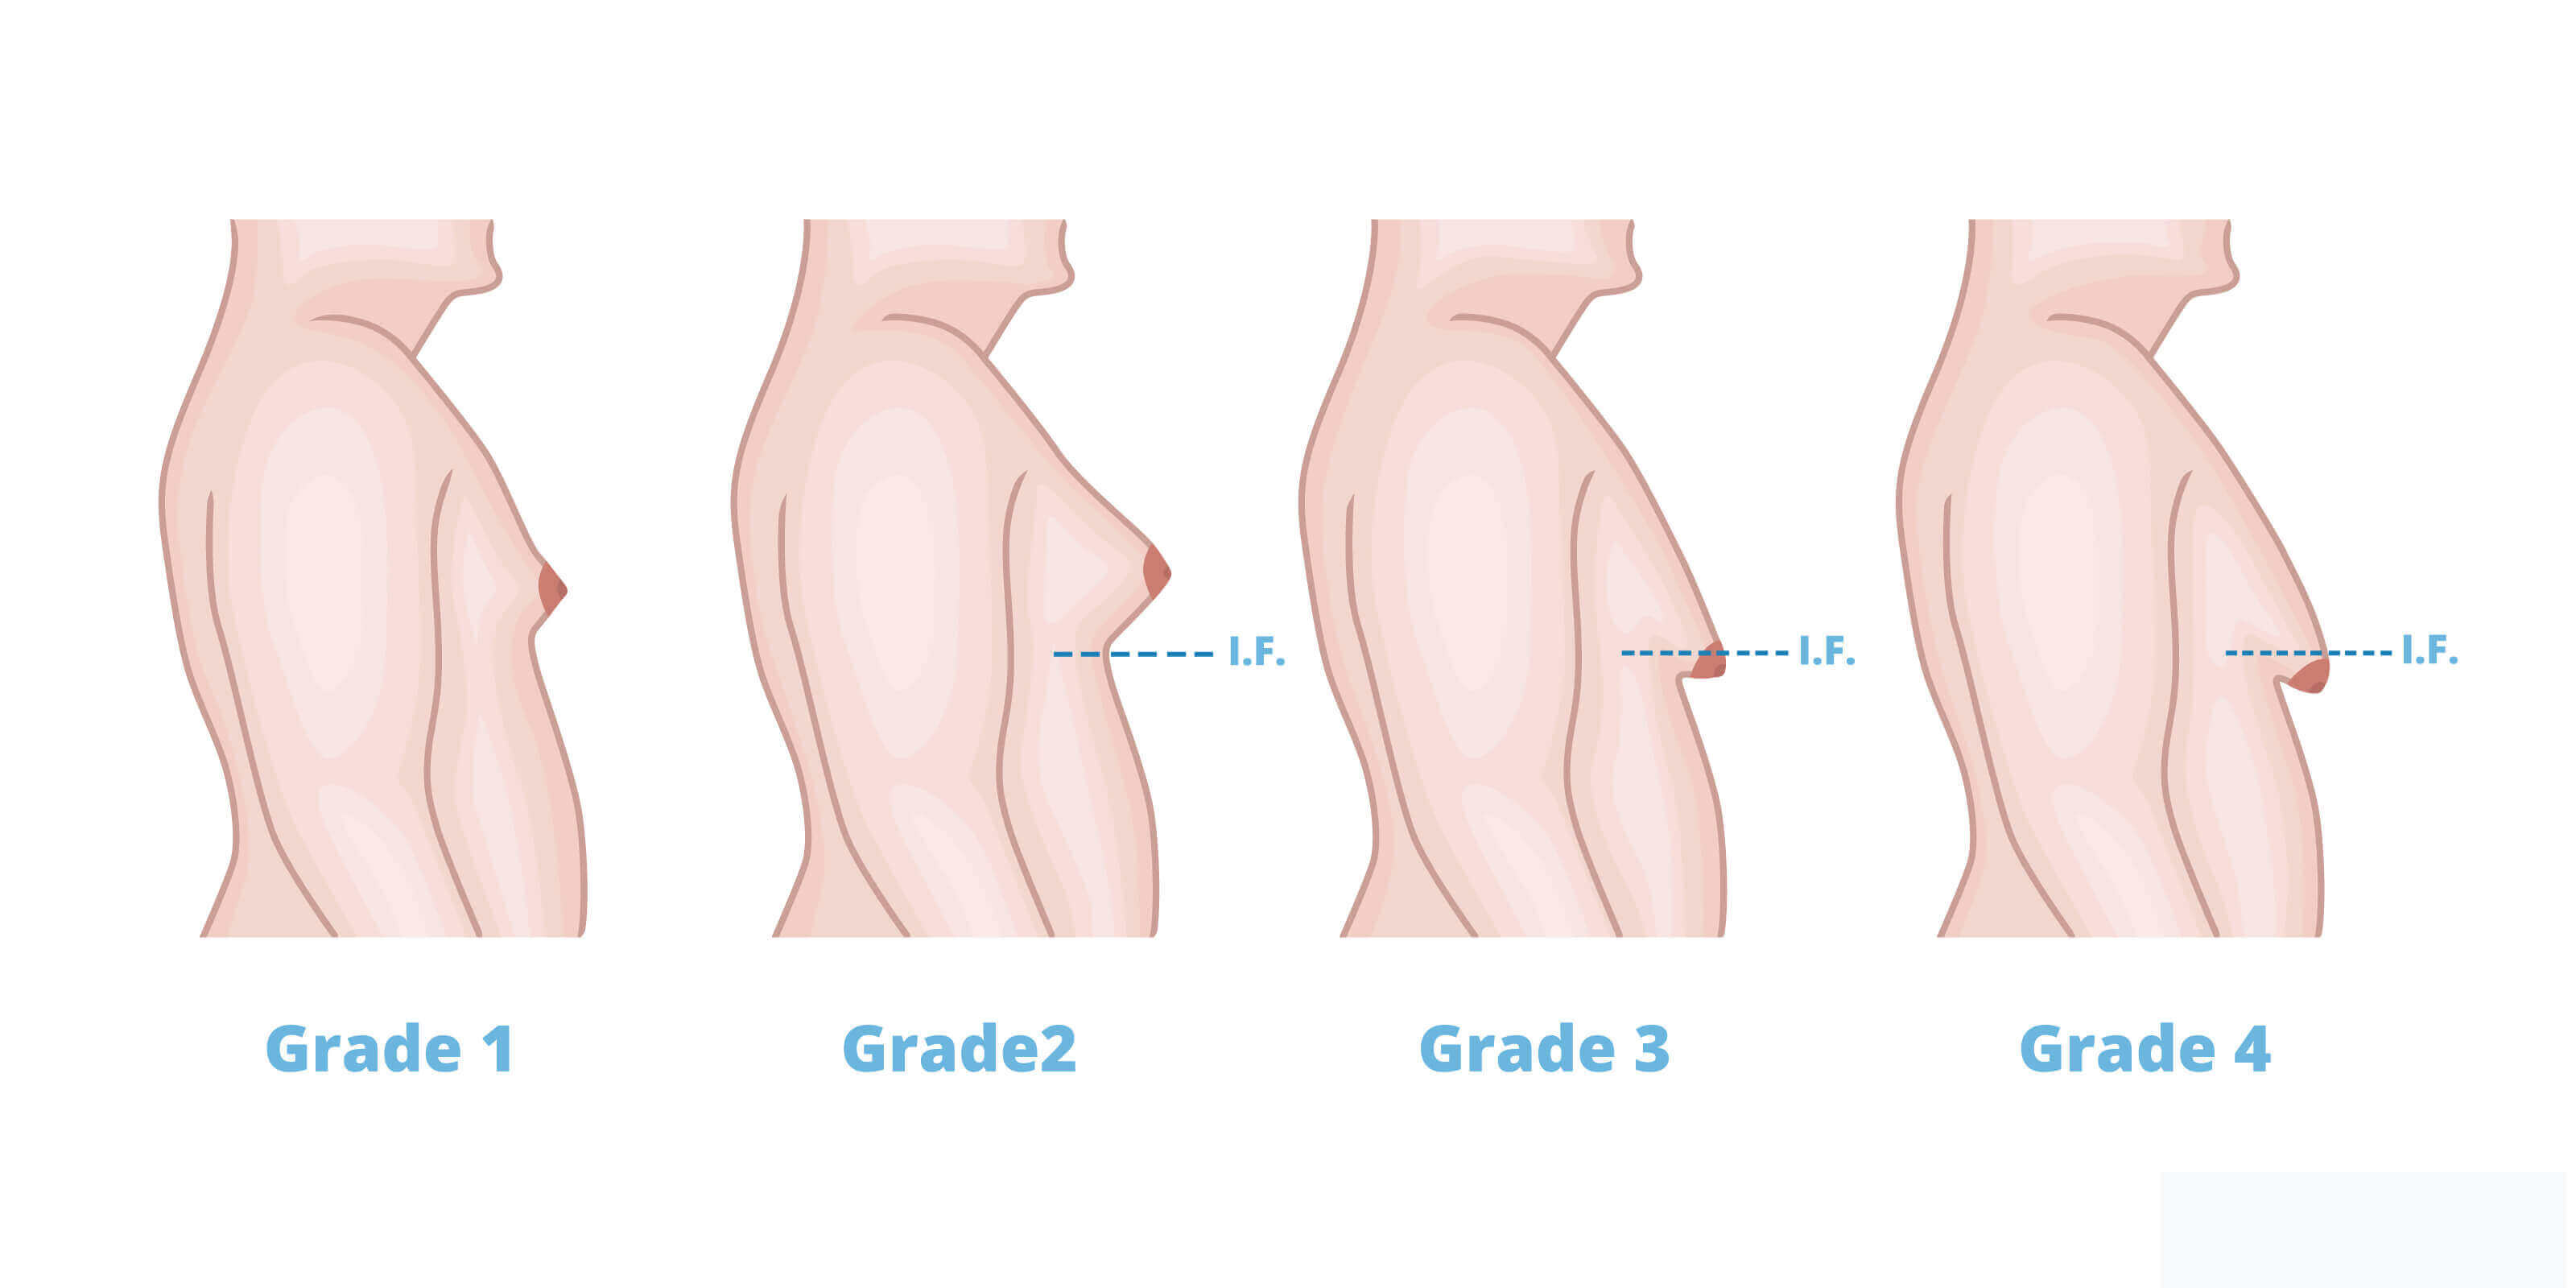 What is Enlarged breasts in men (Gynaecomastia)?